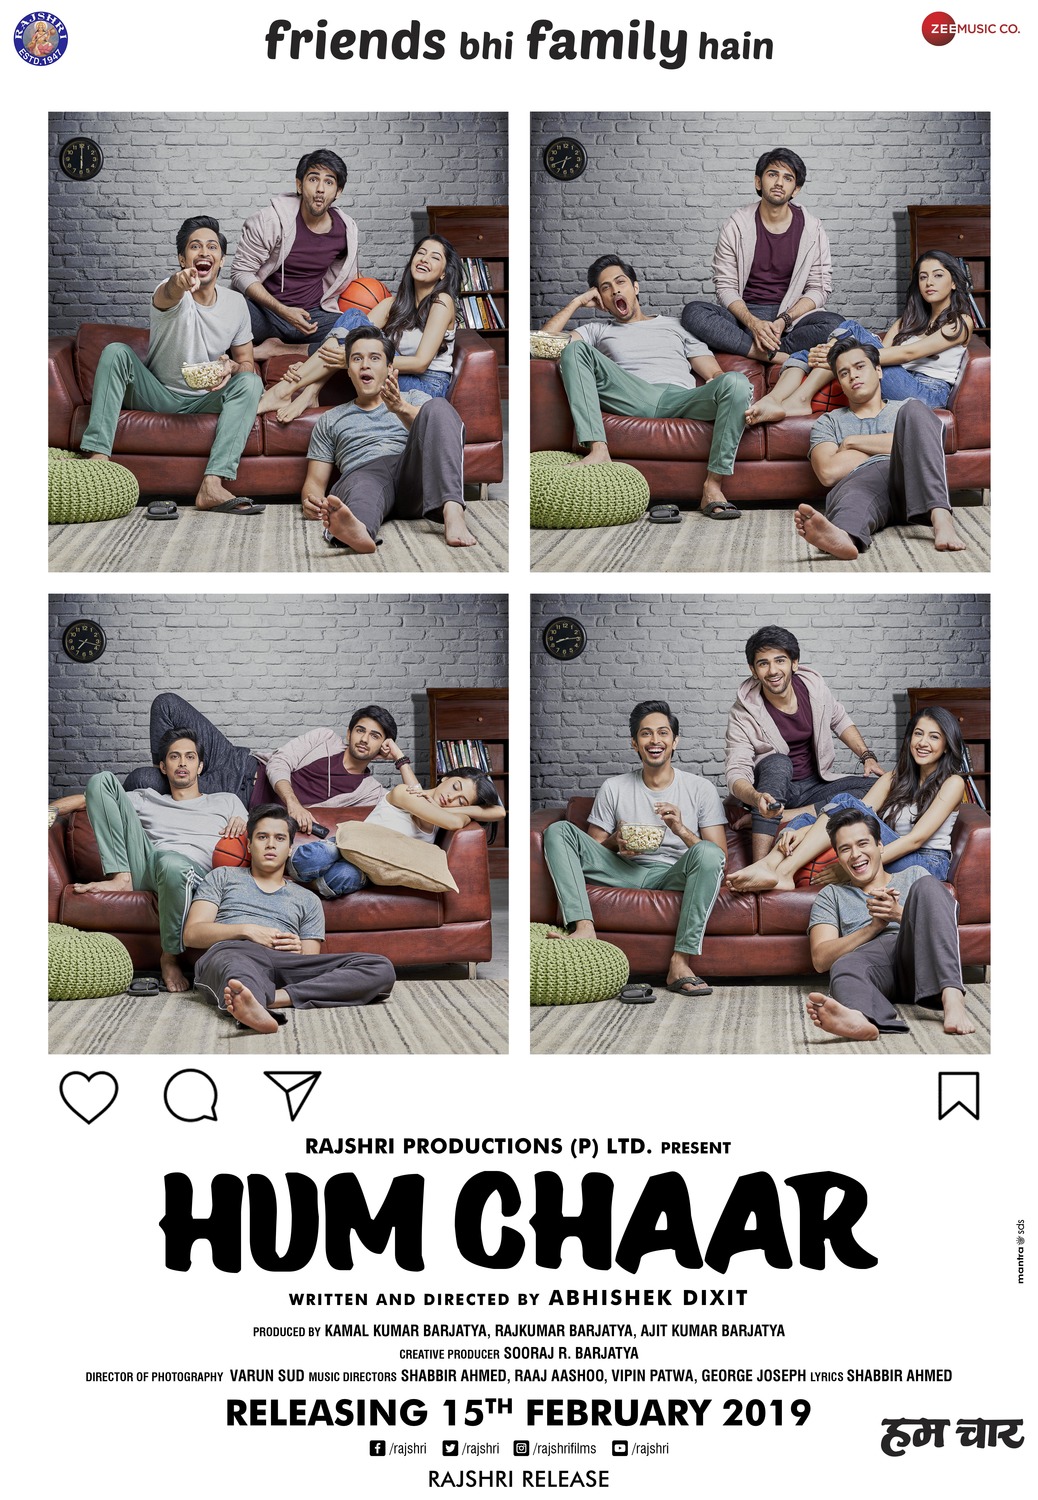 Extra Large Movie Poster Image for Hum chaar 